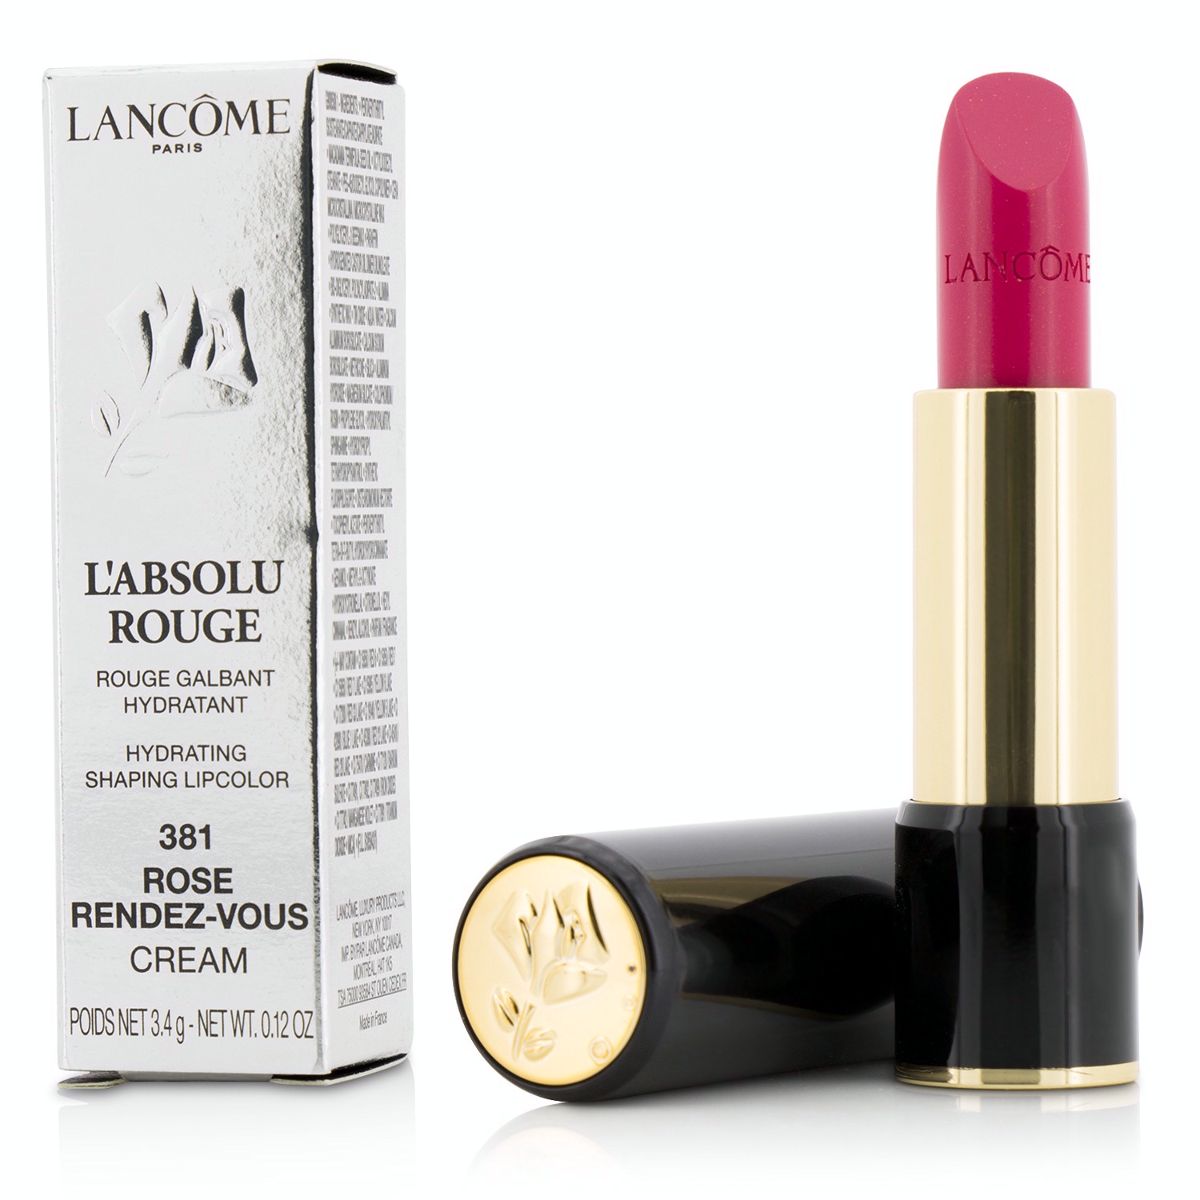 L Absolu Rouge Hydrating Shaping Lipcolor - # 381 Rose Rendez-Vous (Cream) Lancome Image